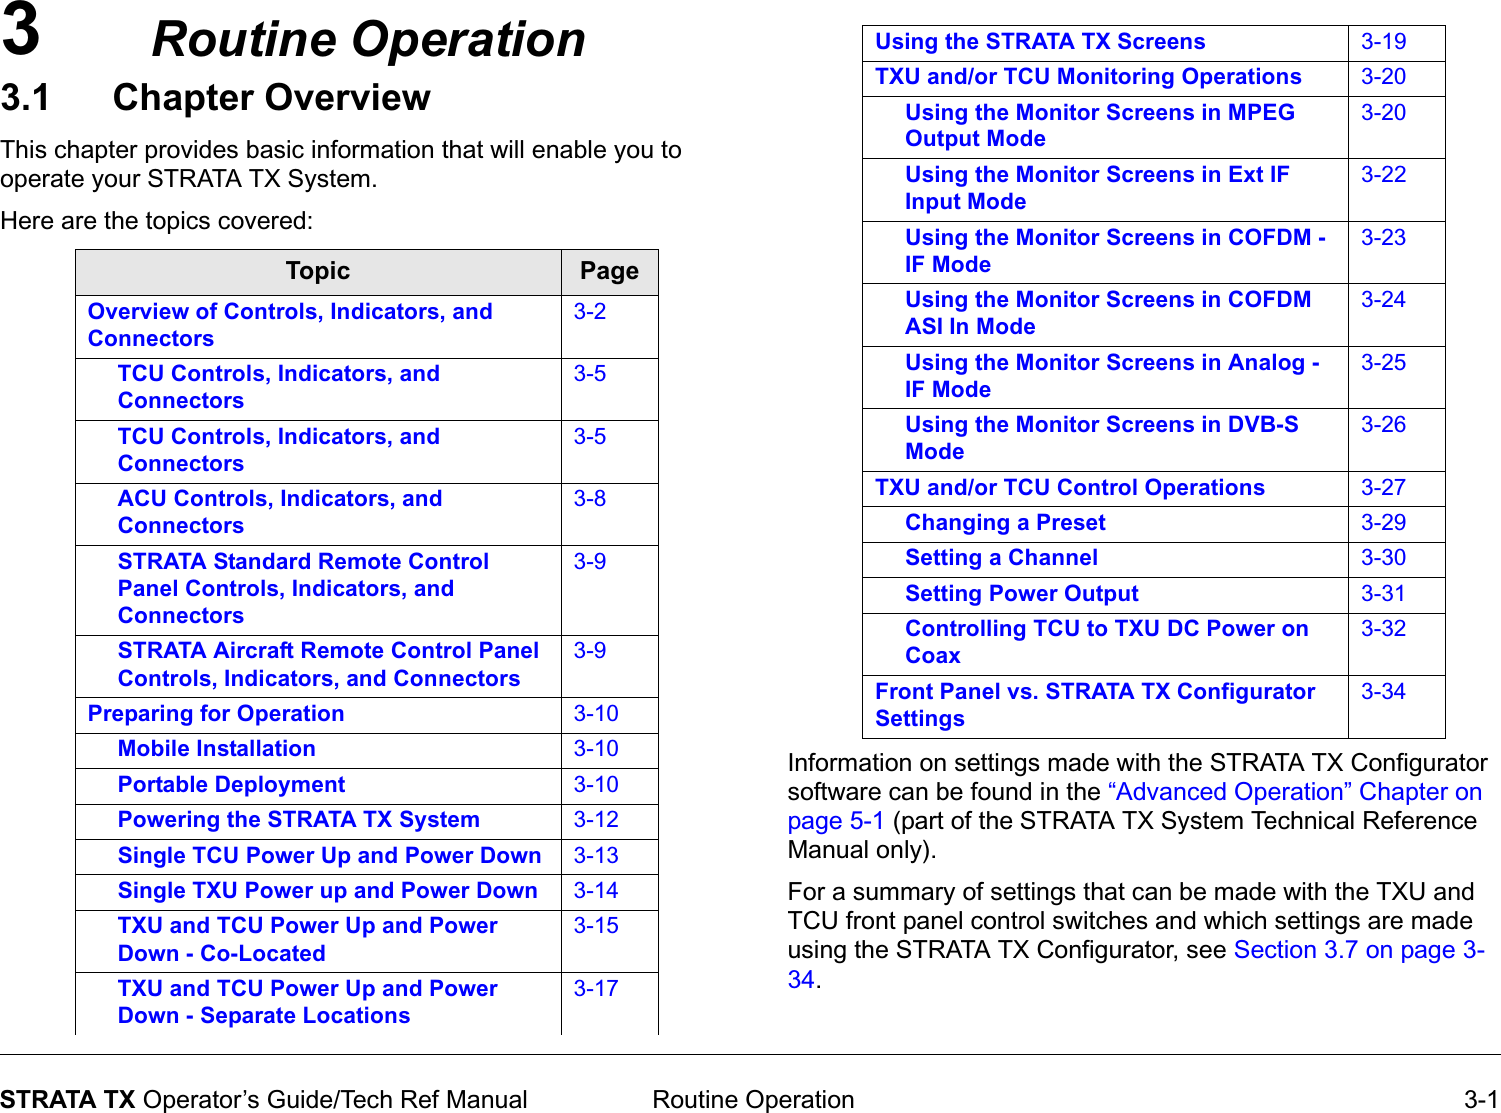 3 Routine Operation 3-1STRATA TX Operator’s Guide/Tech Ref ManualRoutine Operation3.1 Chapter OverviewThis chapter provides basic information that will enable you to operate your STRATA TX System. Here are the topics covered:  Topic PageOverview of Controls, Indicators, and Connectors3-2TCU Controls, Indicators, and Connectors3-5TCU Controls, Indicators, and Connectors3-5ACU Controls, Indicators, and Connectors3-8STRATA Standard Remote Control Panel Controls, Indicators, and Connectors3-9STRATA Aircraft Remote Control Panel Controls, Indicators, and Connectors3-9Preparing for Operation 3-10Mobile Installation 3-10Portable Deployment 3-10Powering the STRATA TX System 3-12Single TCU Power Up and Power Down 3-13Single TXU Power up and Power Down 3-14TXU and TCU Power Up and Power Down - Co-Located3-15TXU and TCU Power Up and Power Down - Separate Locations3-17Information on settings made with the STRATA TX Configurator software can be found in the “Advanced Operation” Chapter on page 5-1 (part of the STRATA TX System Technical Reference Manual only). For a summary of settings that can be made with the TXU and TCU front panel control switches and which settings are made using the STRATA TX Configurator, see Section 3.7 on page 3-34.Using the STRATA TX Screens 3-19TXU and/or TCU Monitoring Operations 3-20Using the Monitor Screens in MPEG Output Mode3-20Using the Monitor Screens in Ext IF Input Mode3-22Using the Monitor Screens in COFDM - IF Mode3-23Using the Monitor Screens in COFDM ASI In Mode3-24Using the Monitor Screens in Analog - IF Mode3-25Using the Monitor Screens in DVB-S Mode3-26TXU and/or TCU Control Operations 3-27Changing a Preset 3-29Setting a Channel 3-30Setting Power Output 3-31Controlling TCU to TXU DC Power on Coax3-32Front Panel vs. STRATA TX Configurator Settings3-34